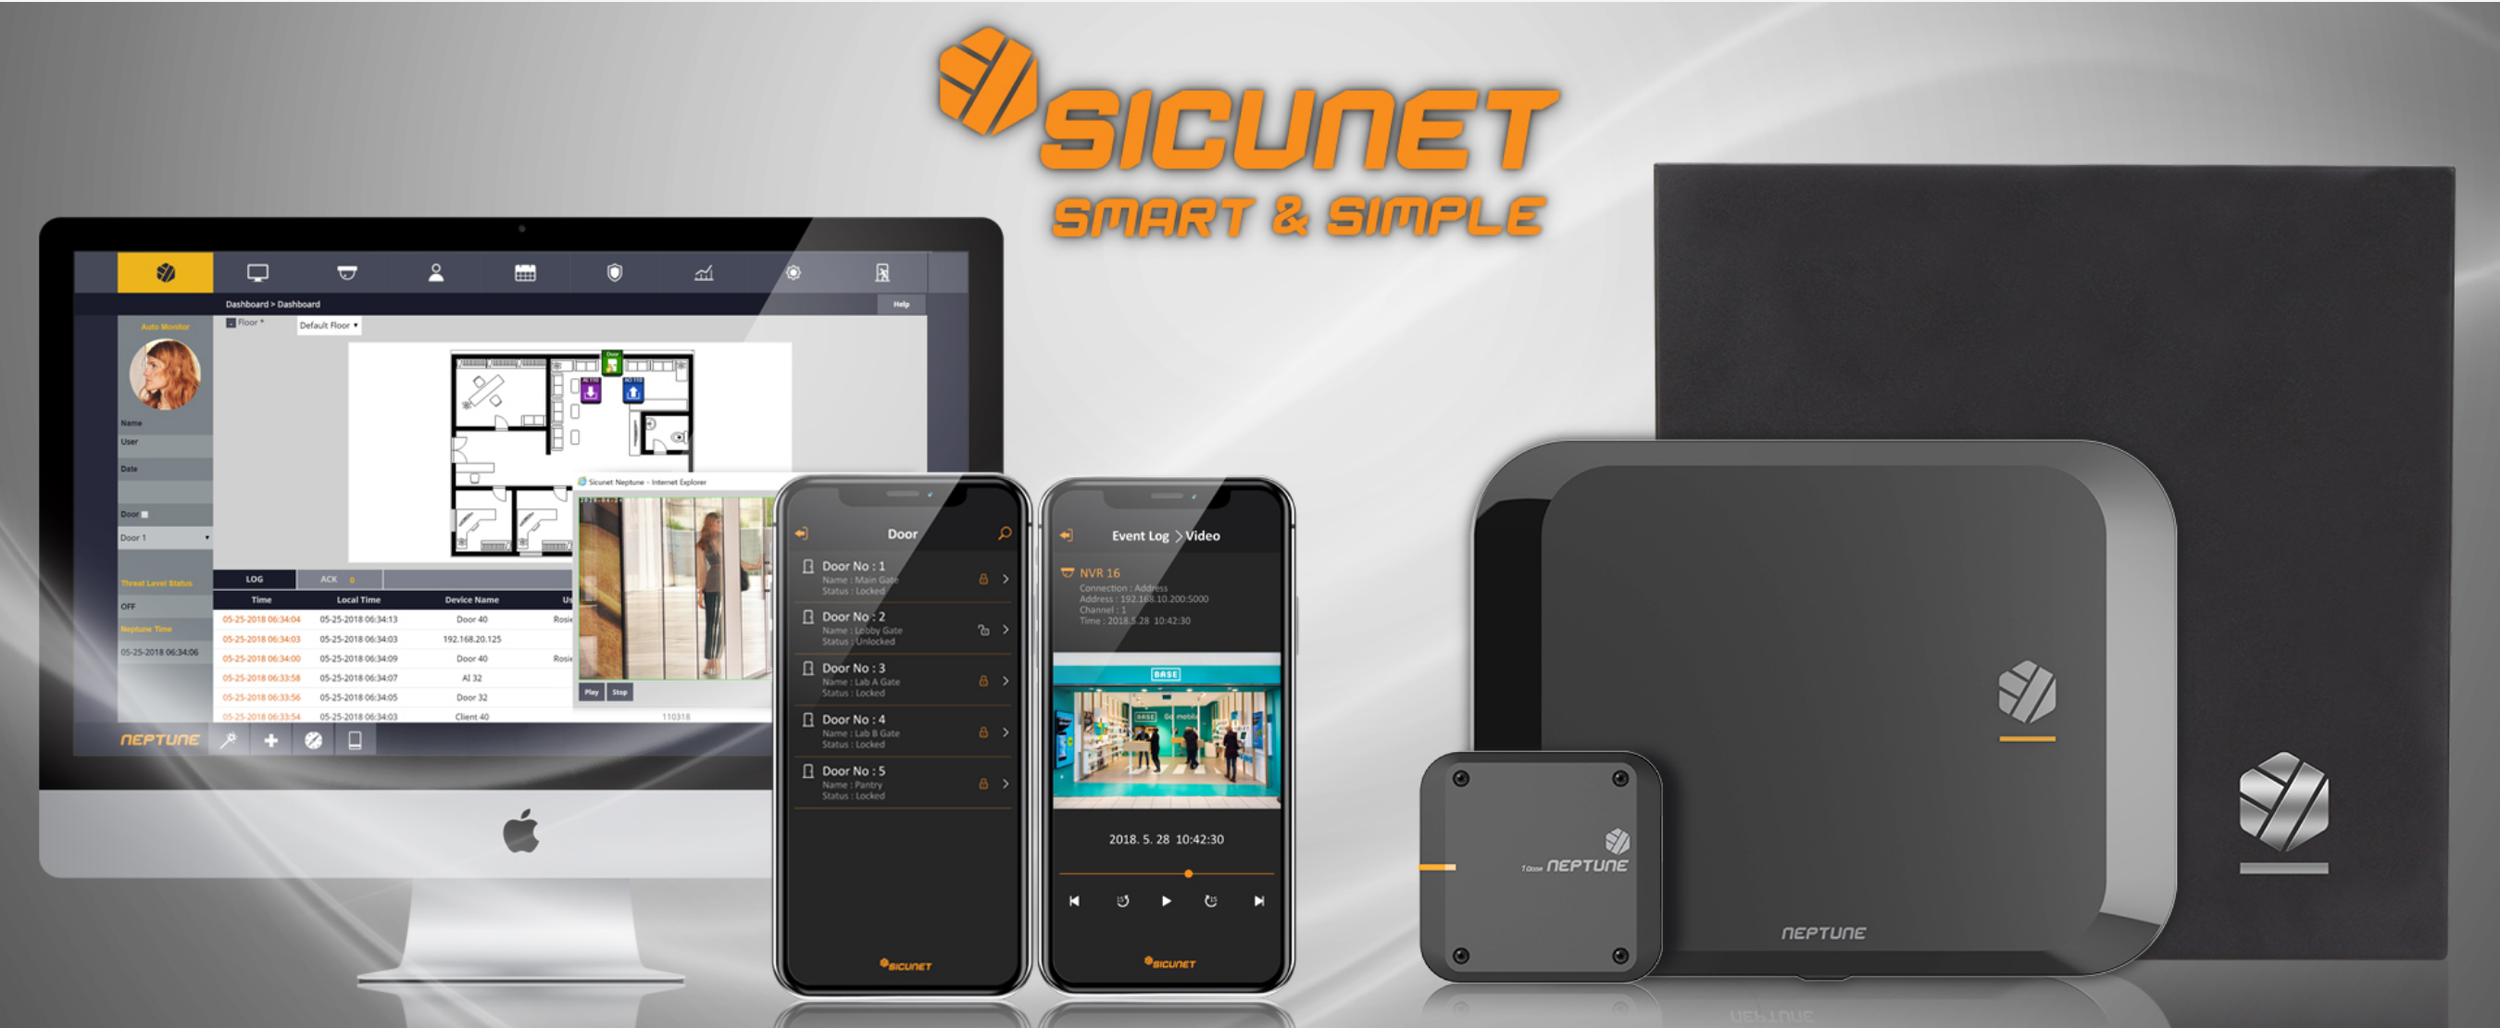 Sicunet Smart & Simple Banner.png